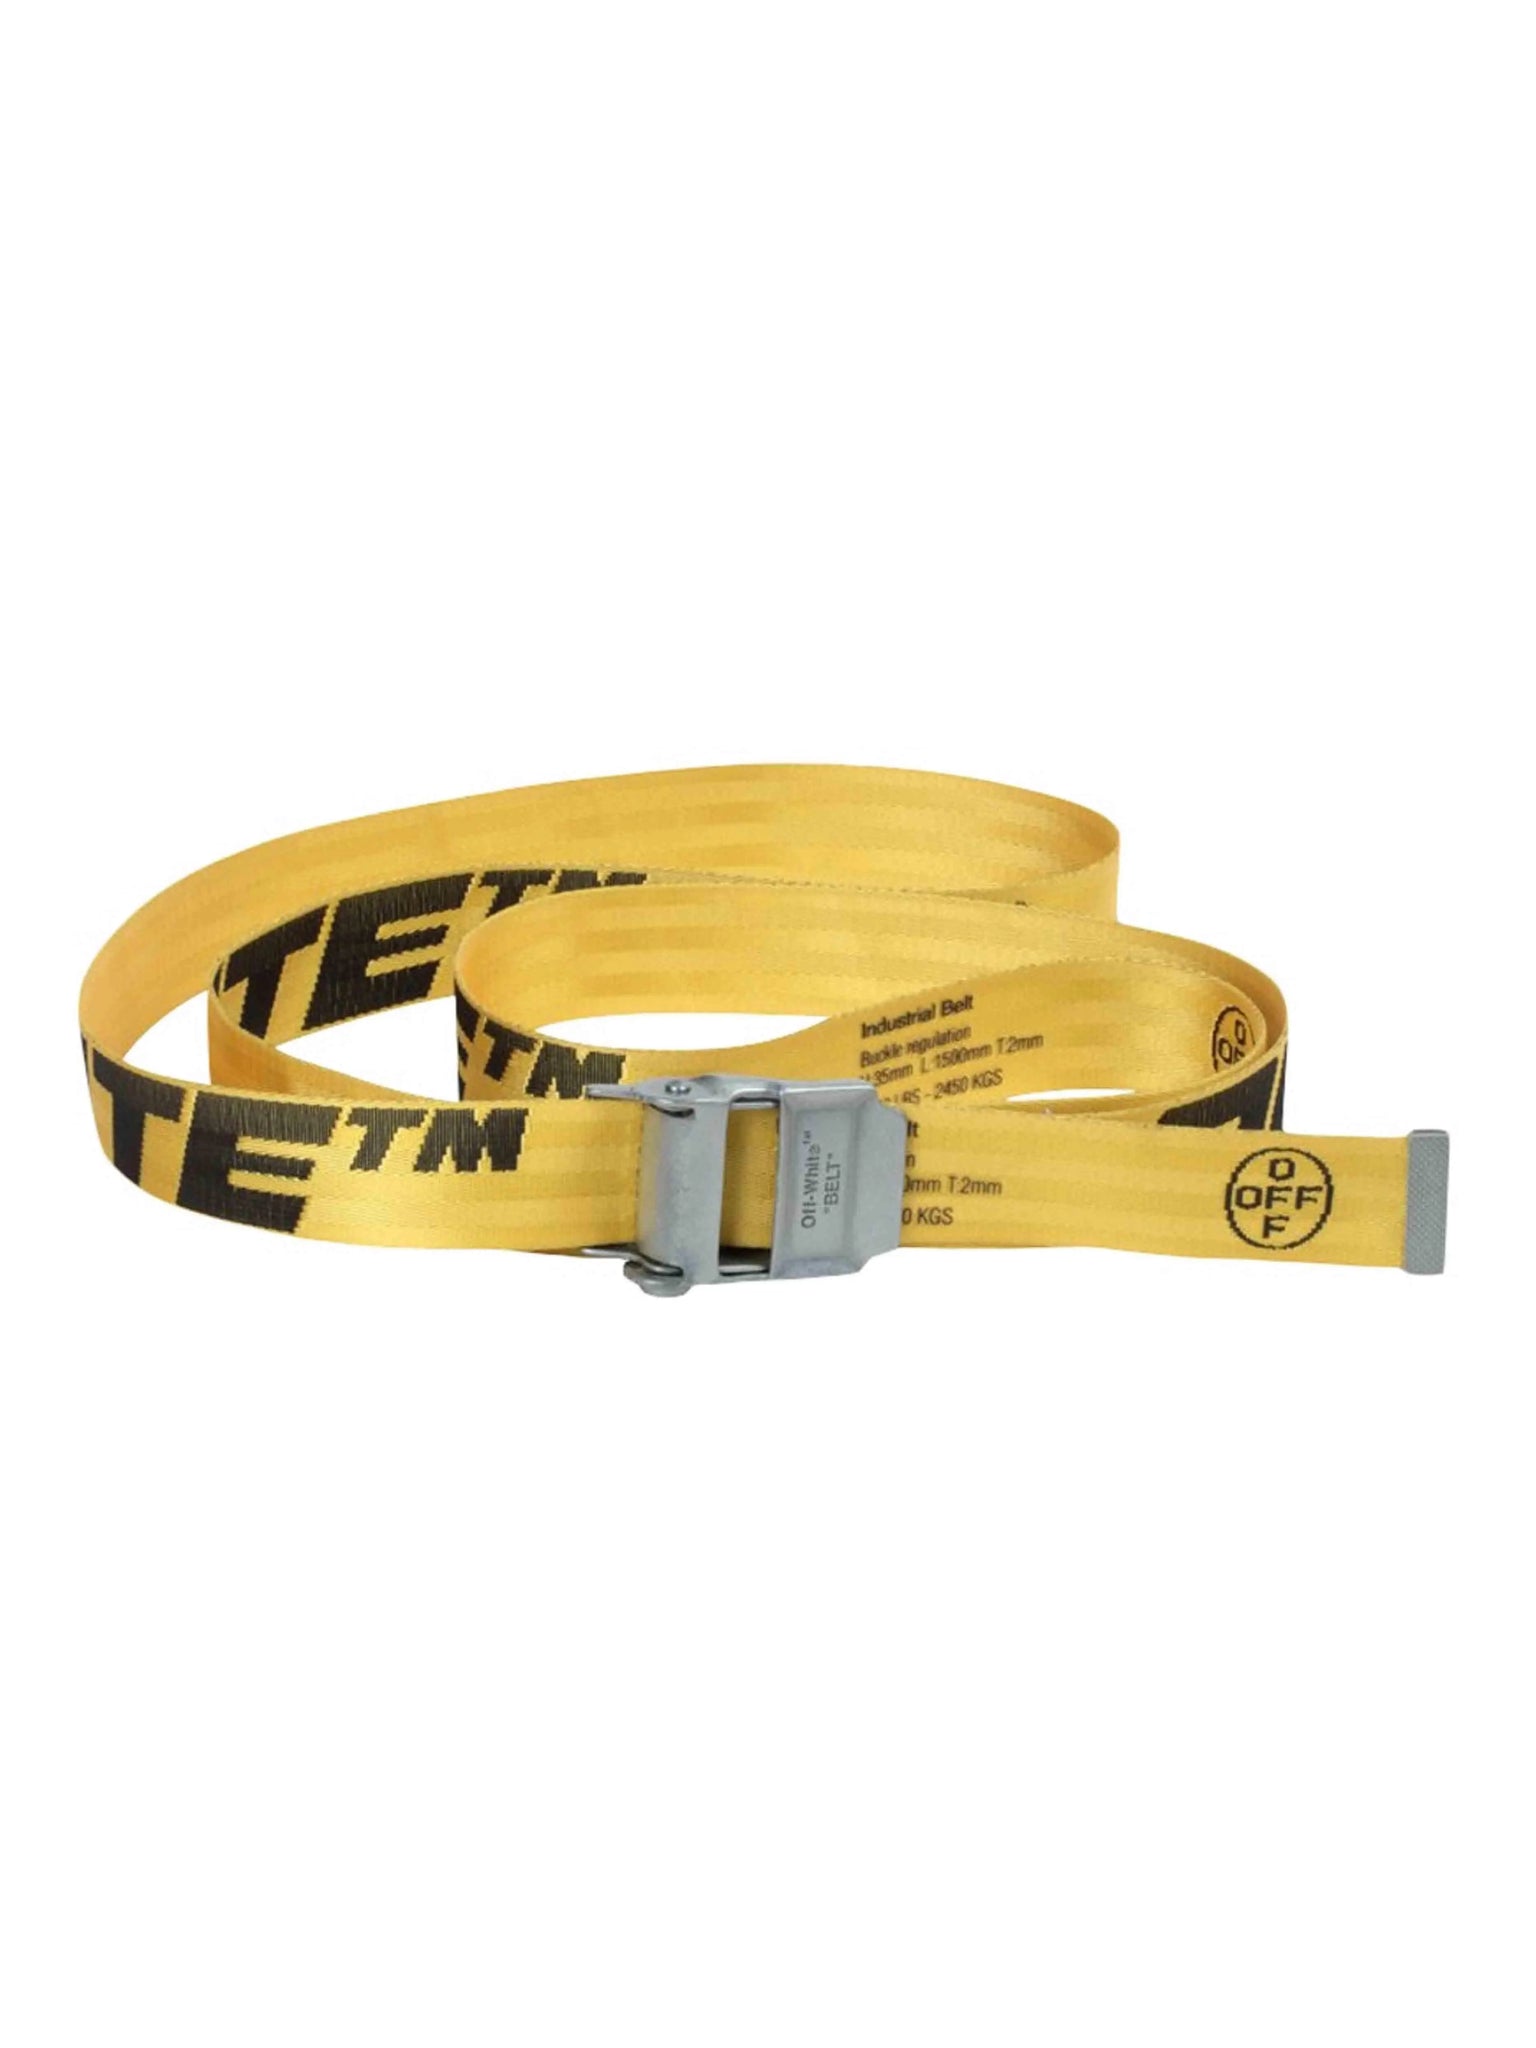 Off-White 2.0 Industrial Belt Yellow/Black [FW19] Prior